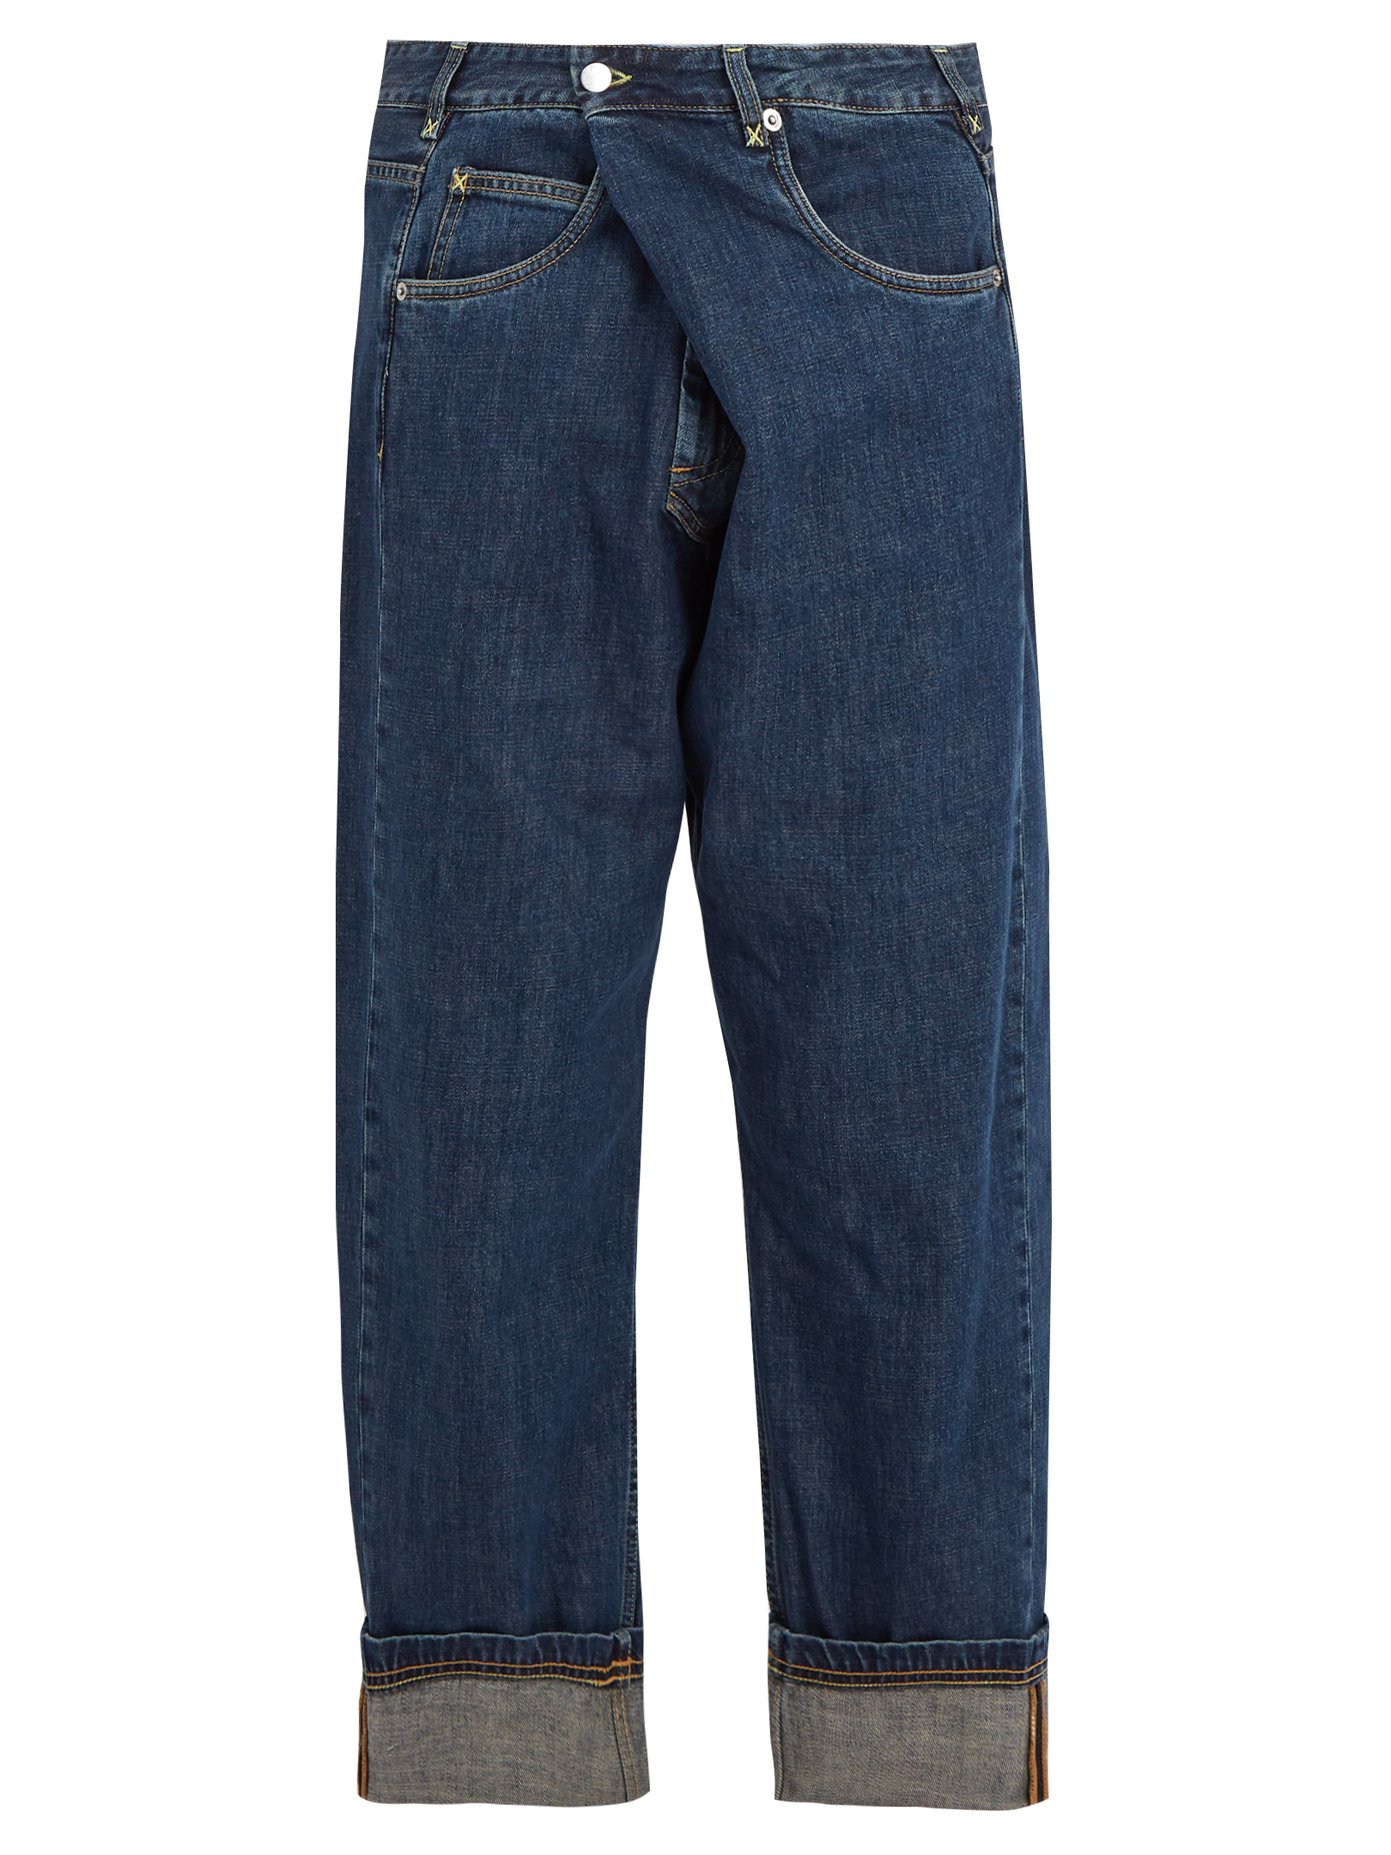 jw anderson jeans